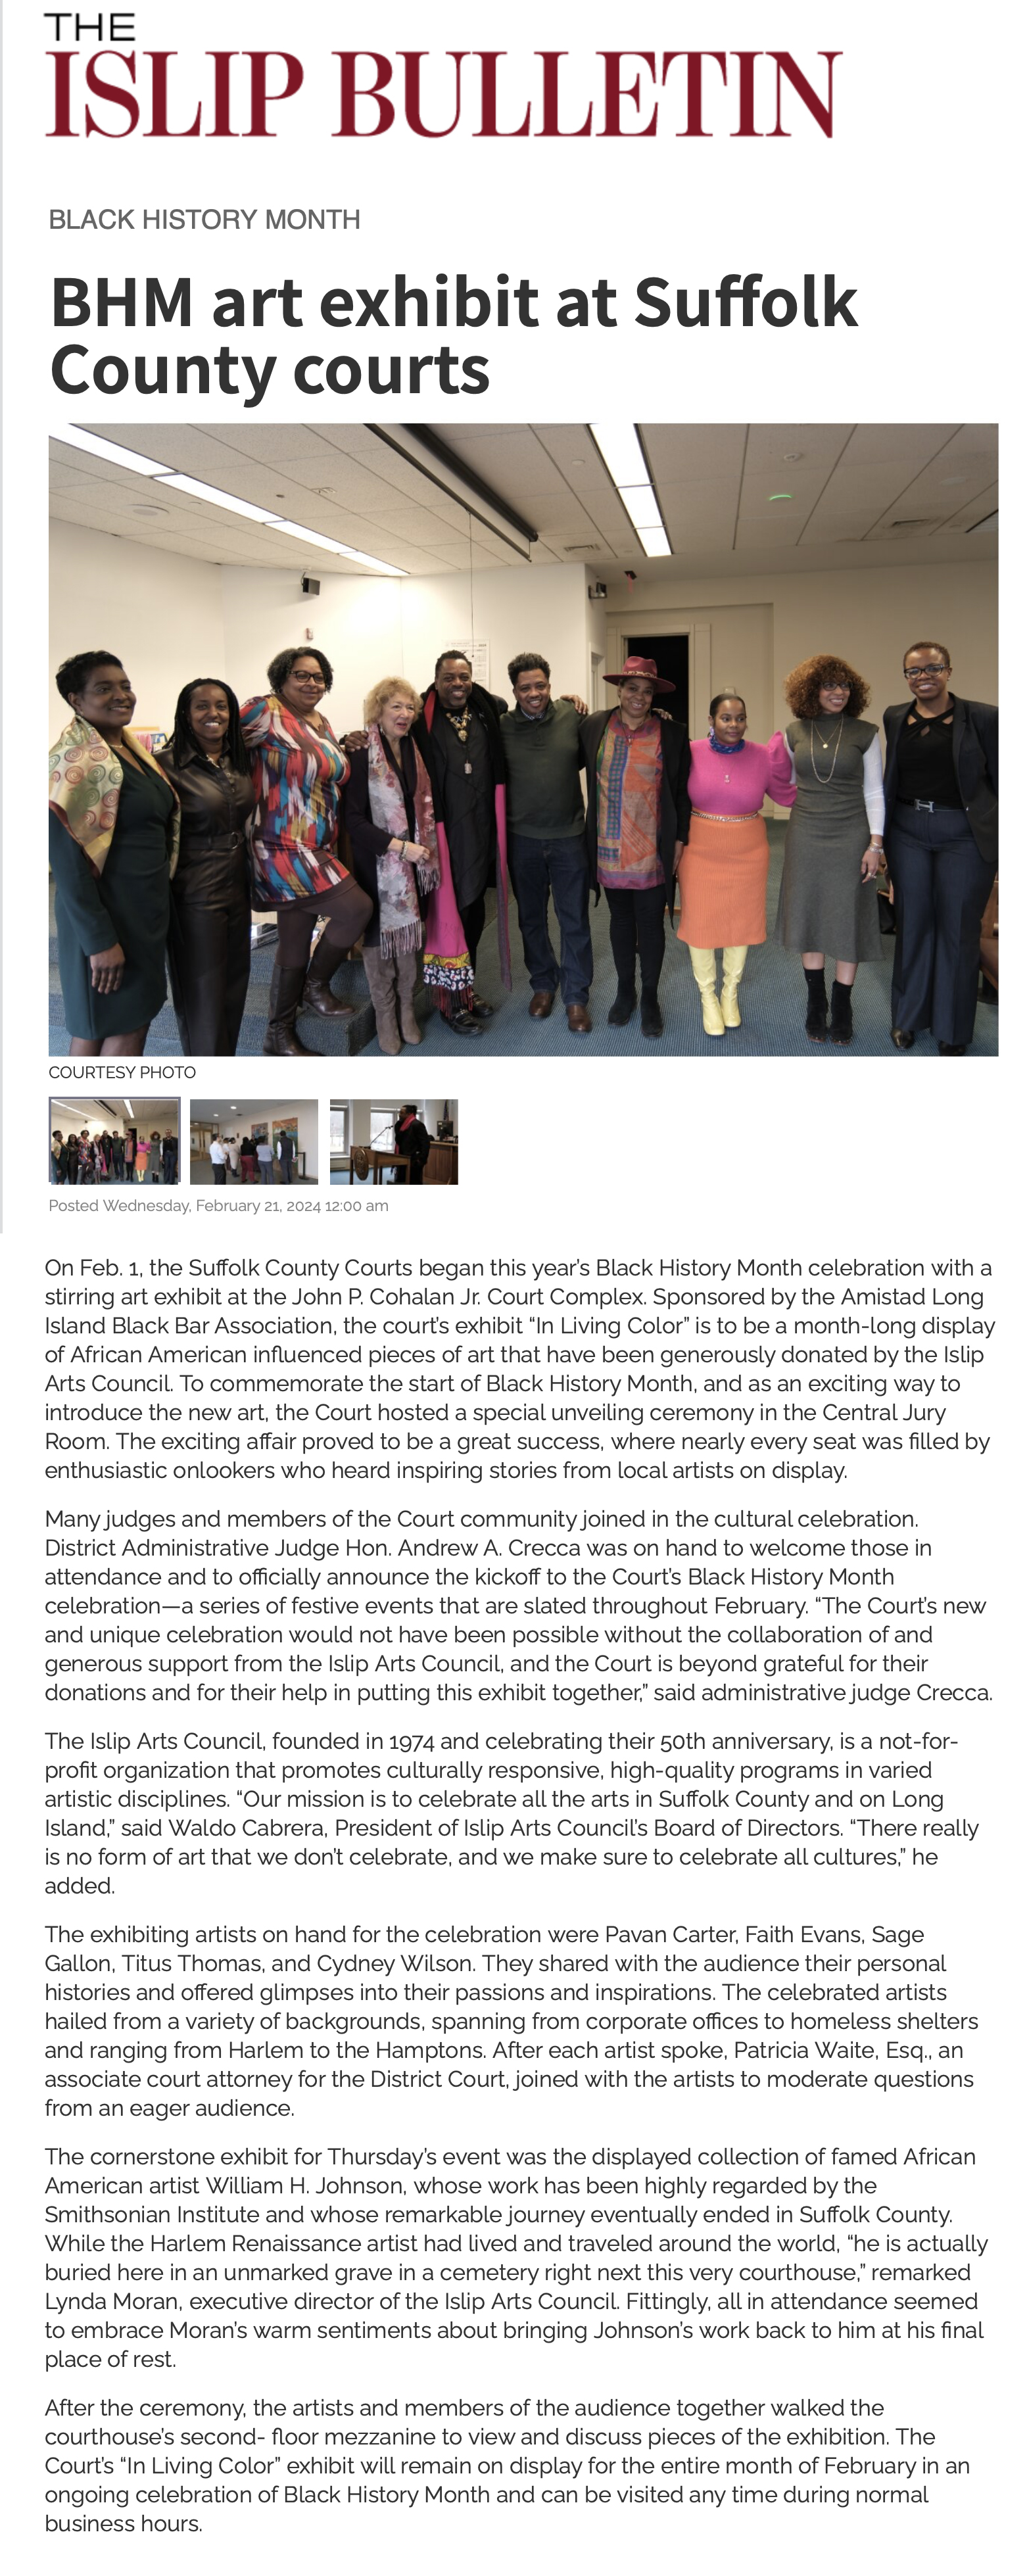 FEB 2024 / Black History Month IAC Exhibition in Suffolk County Courts Featured in Islip Bulletin